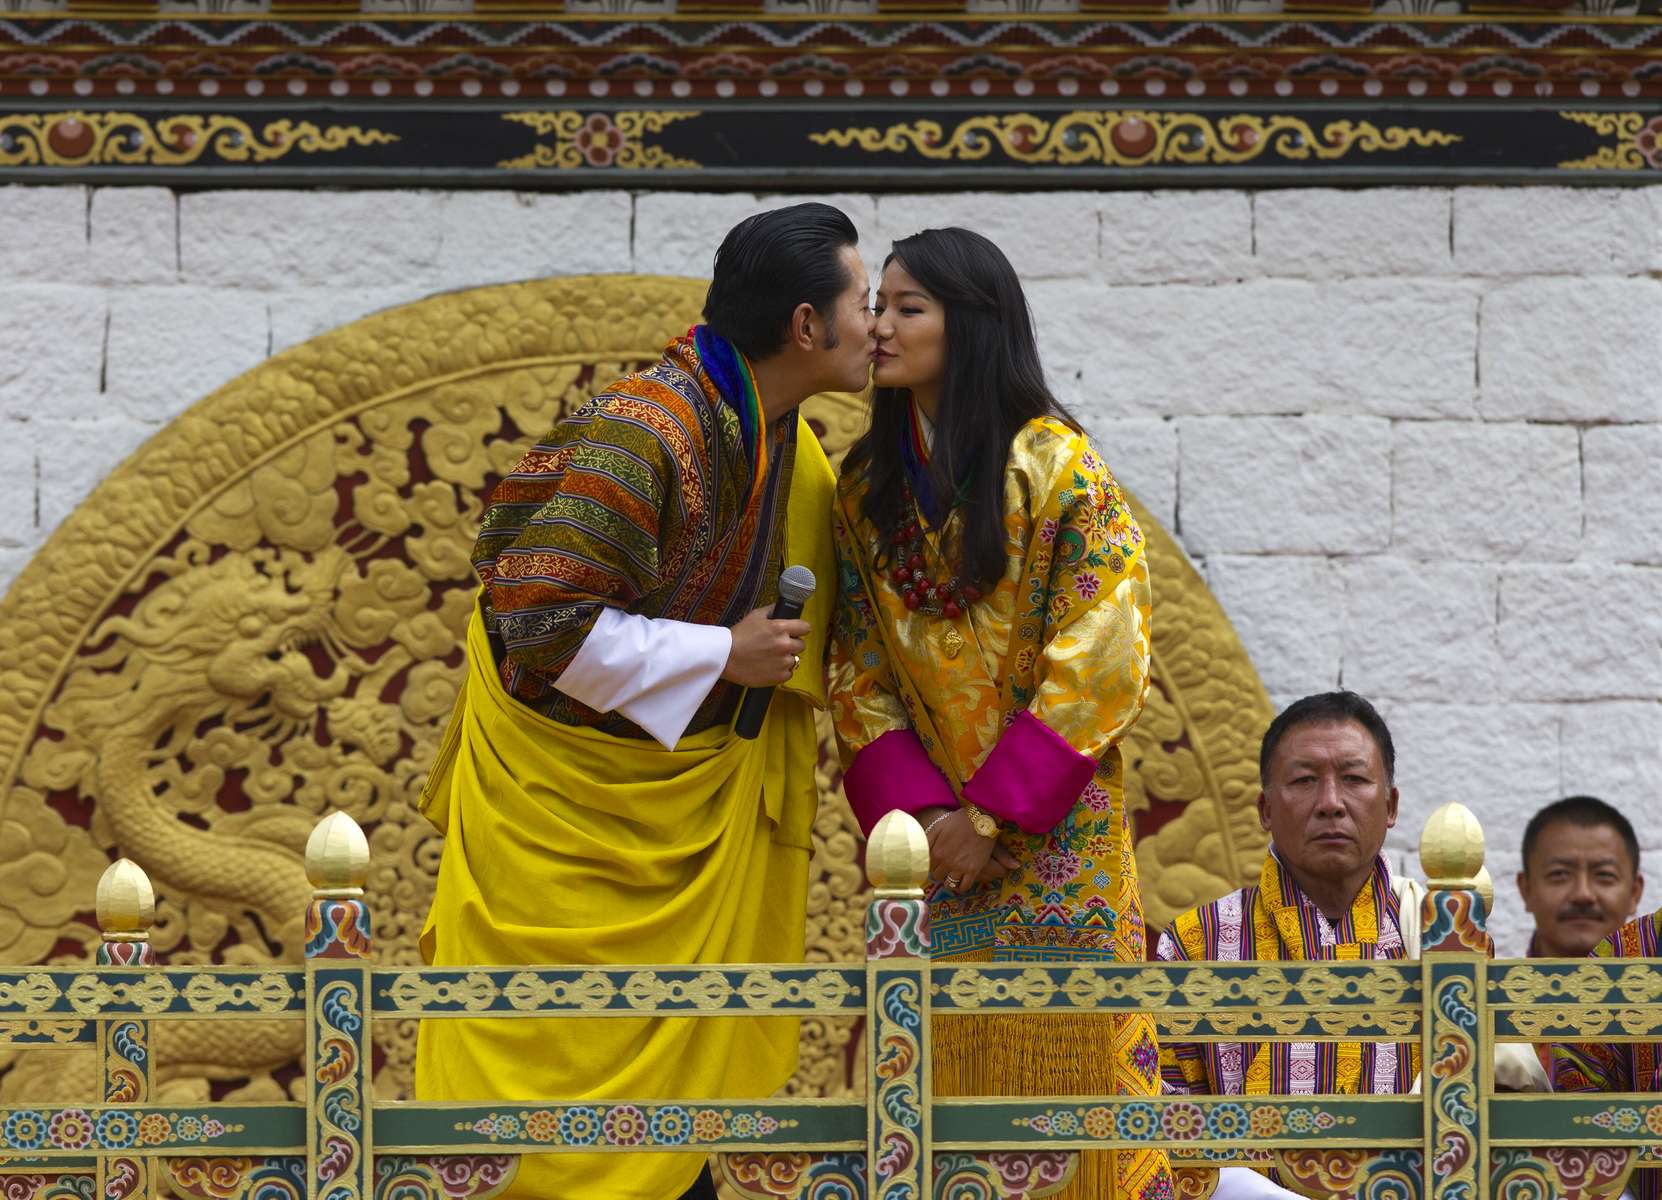 THIMPHU, BHUTAN - OCTOBER 15: The Royal couple King Jigme Khesar Namgyel Wangchuck and Queen of Bhutan Ashi Jetsun Pema Wangchuck kiss in front of thousands of Bhutanese citizens at the celebration ground at ChangLeme Thang on October 15, 2011 in Thimphu, Bhutan. Today marked the third and final day of celebrations for the royal wedding with singing and dancing. (Photo by Paula Bronstein /Getty Images)